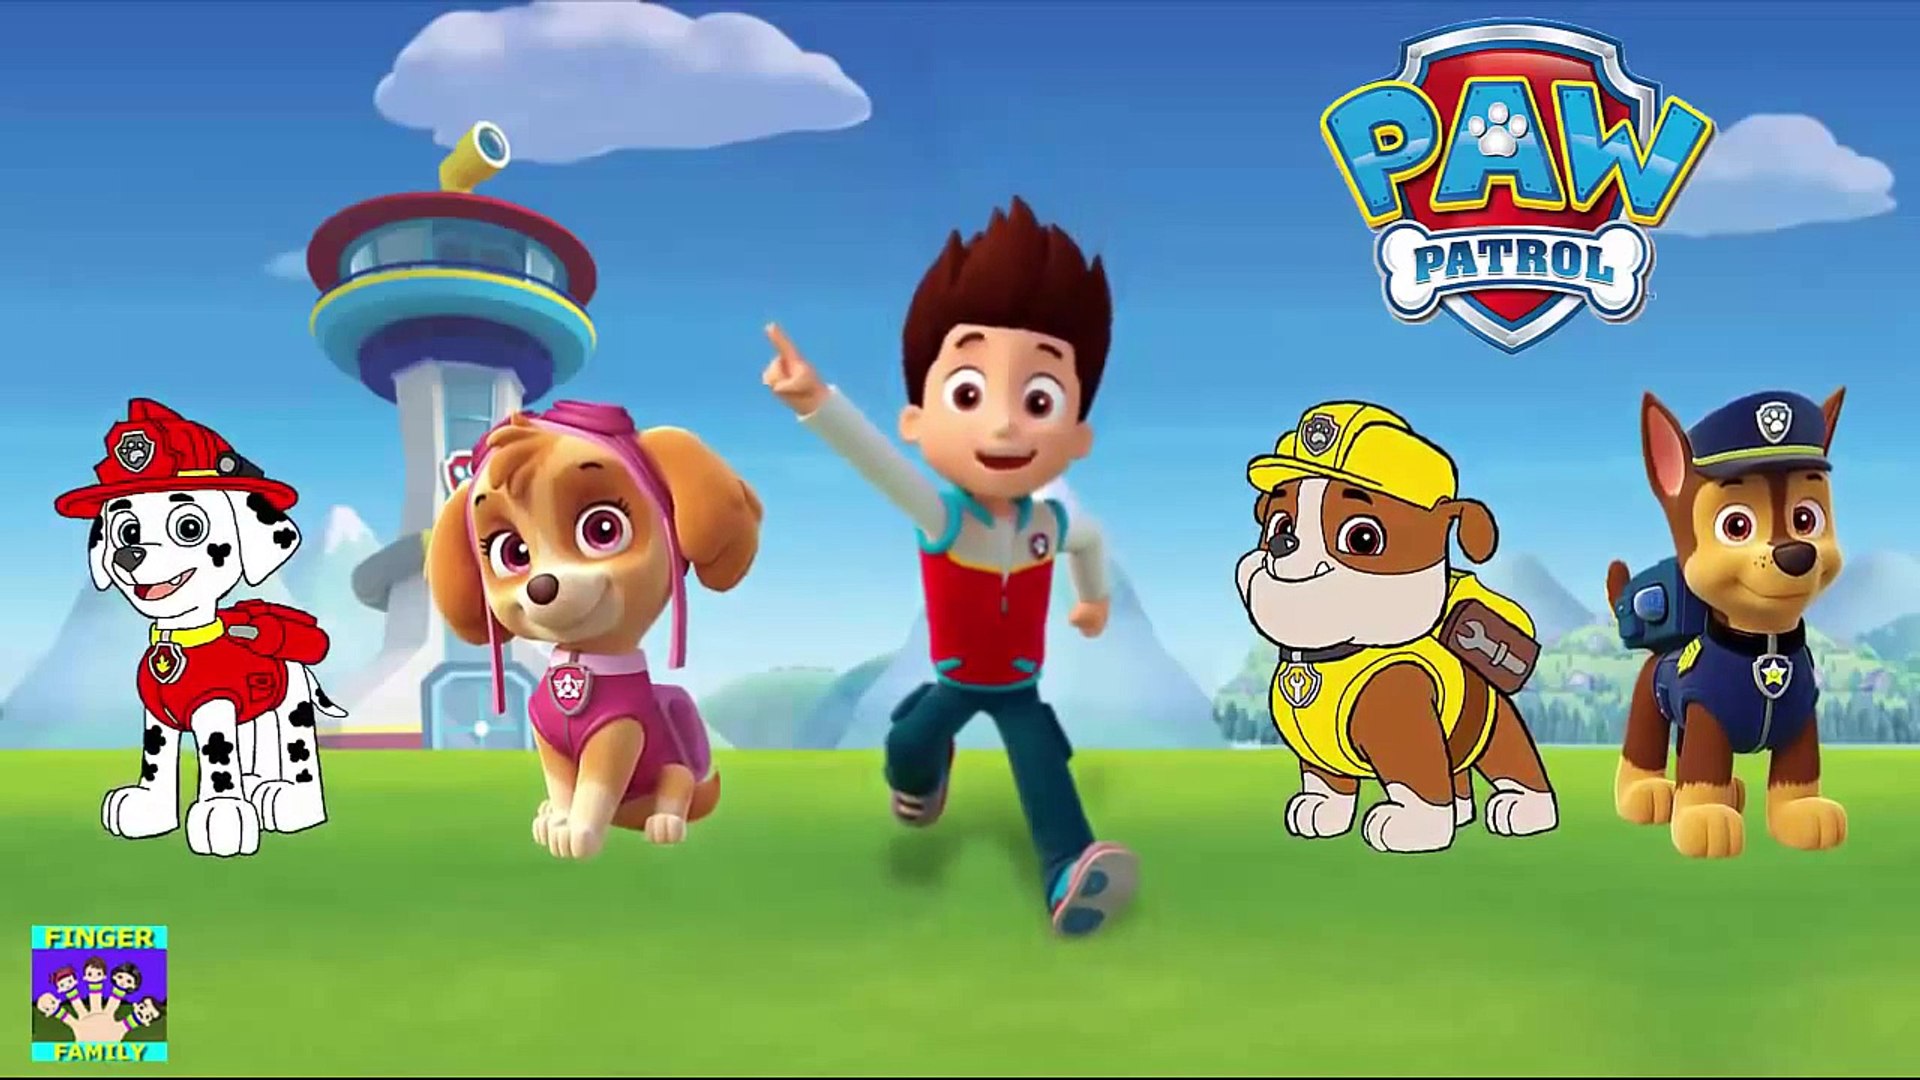 PAW PATROL Finger Family Song For Children | Dady Finger Nursey Rhymes -  video dailymotion